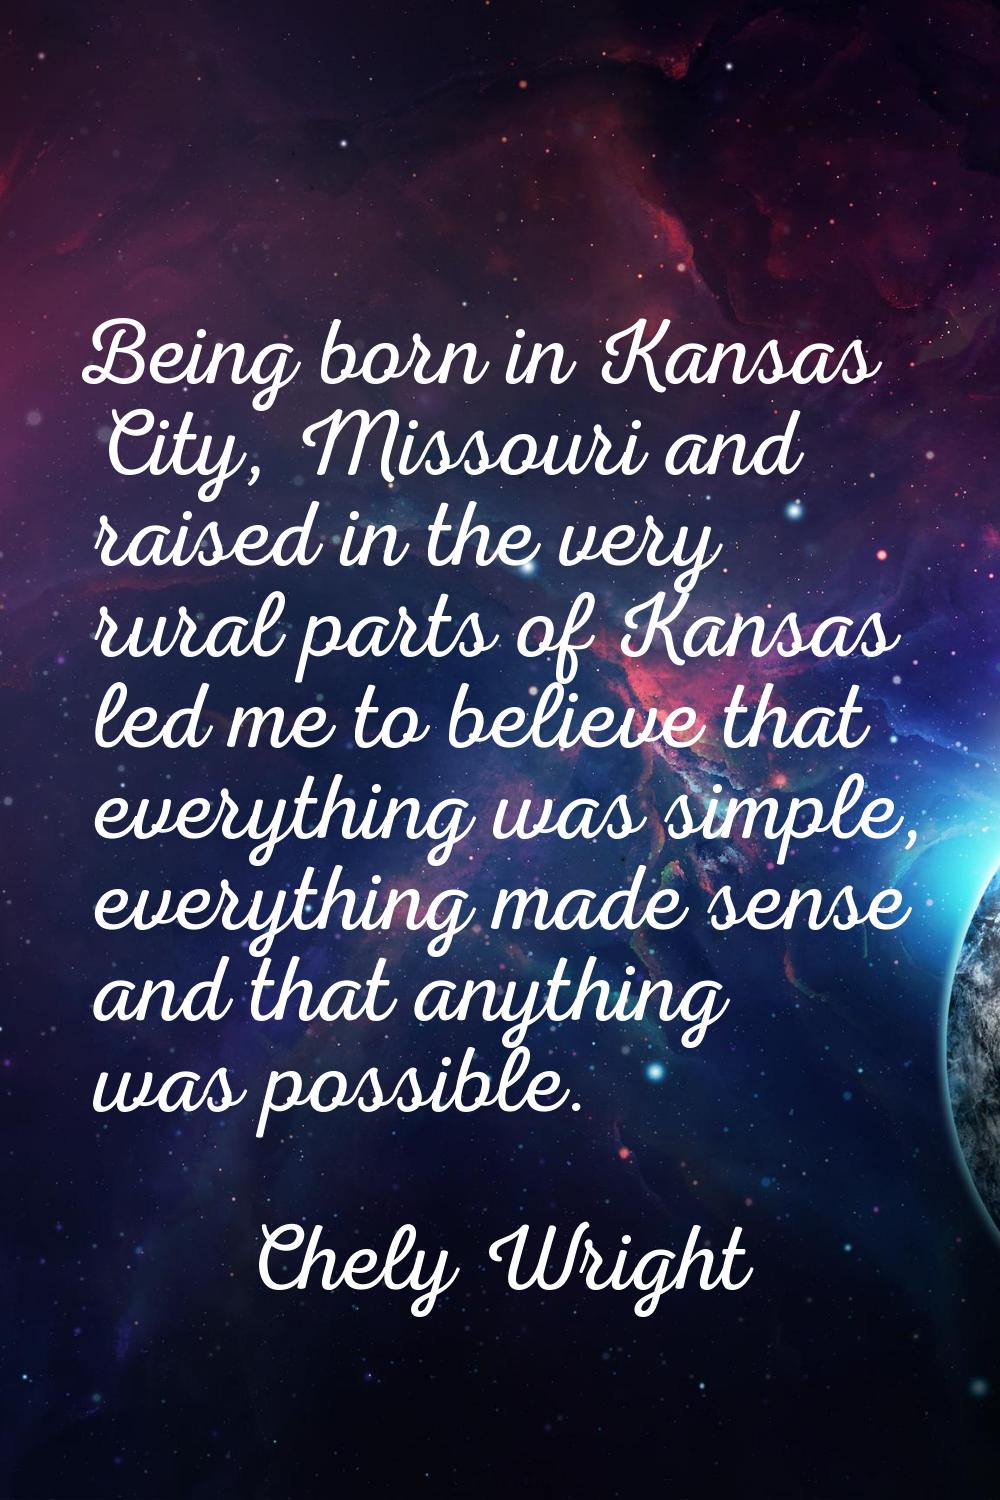 Being born in Kansas City, Missouri and raised in the very rural parts of Kansas led me to believe 